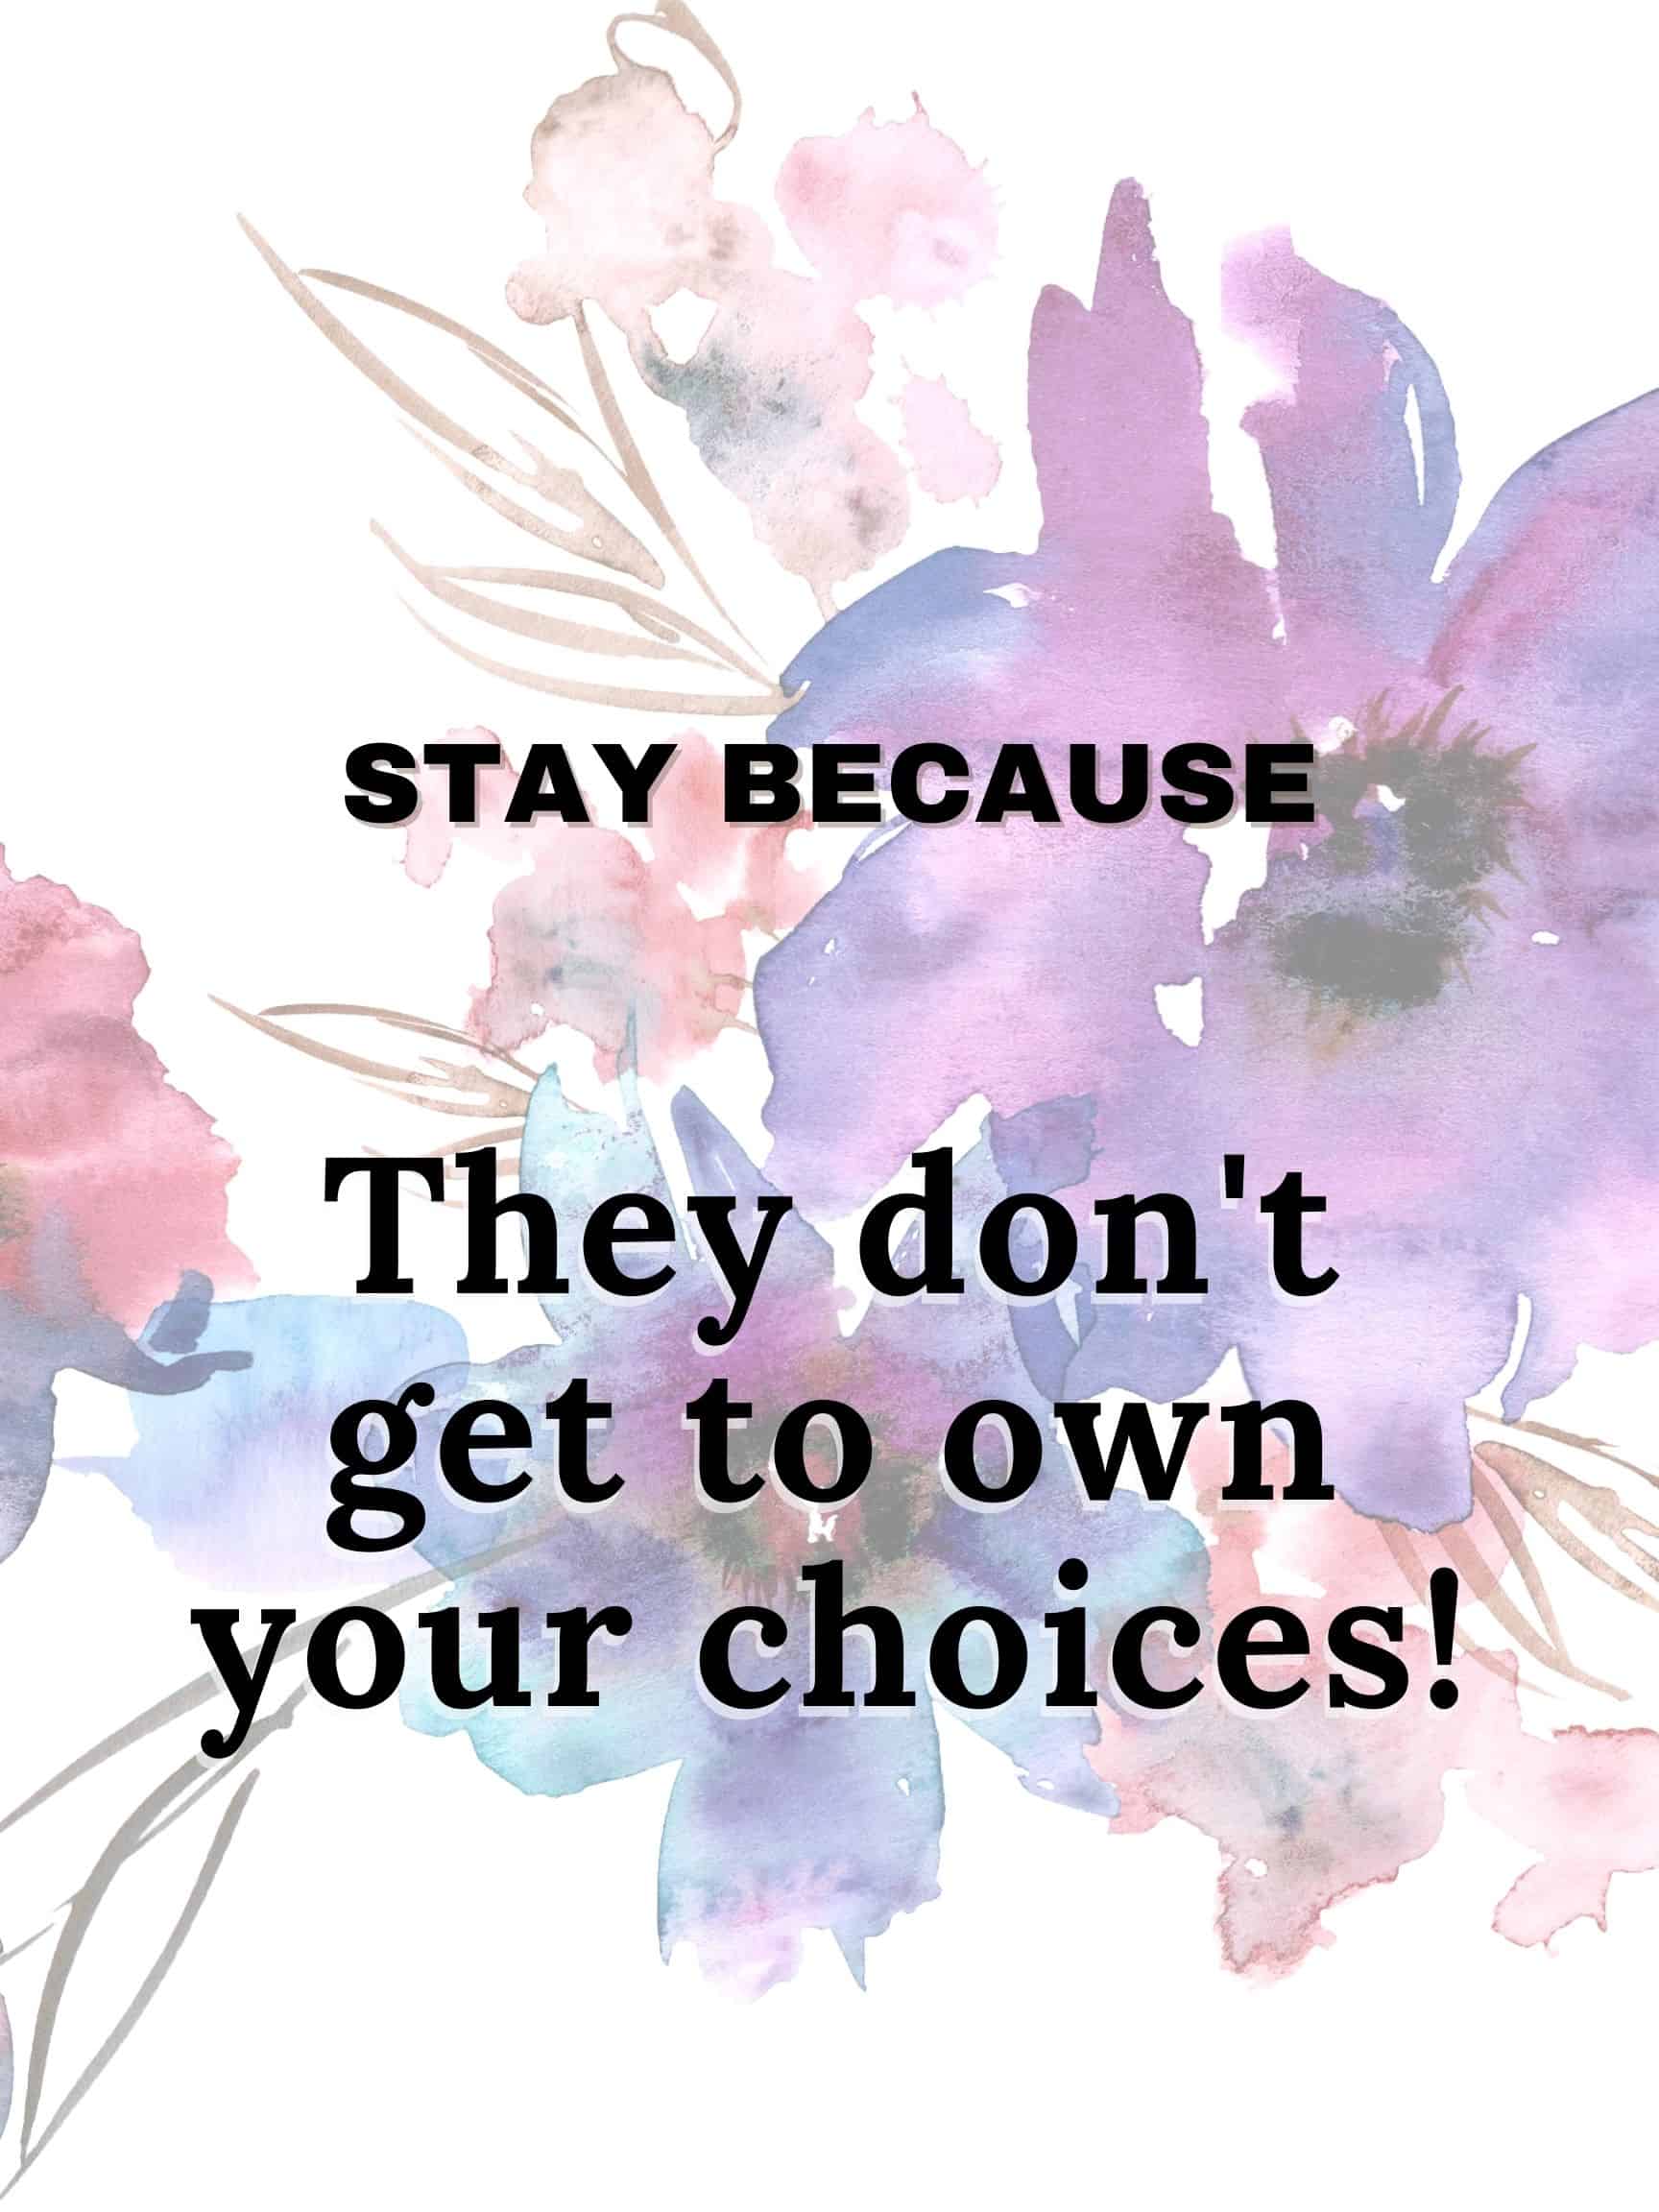 Stay because they don't get to own your choices #StayBecause